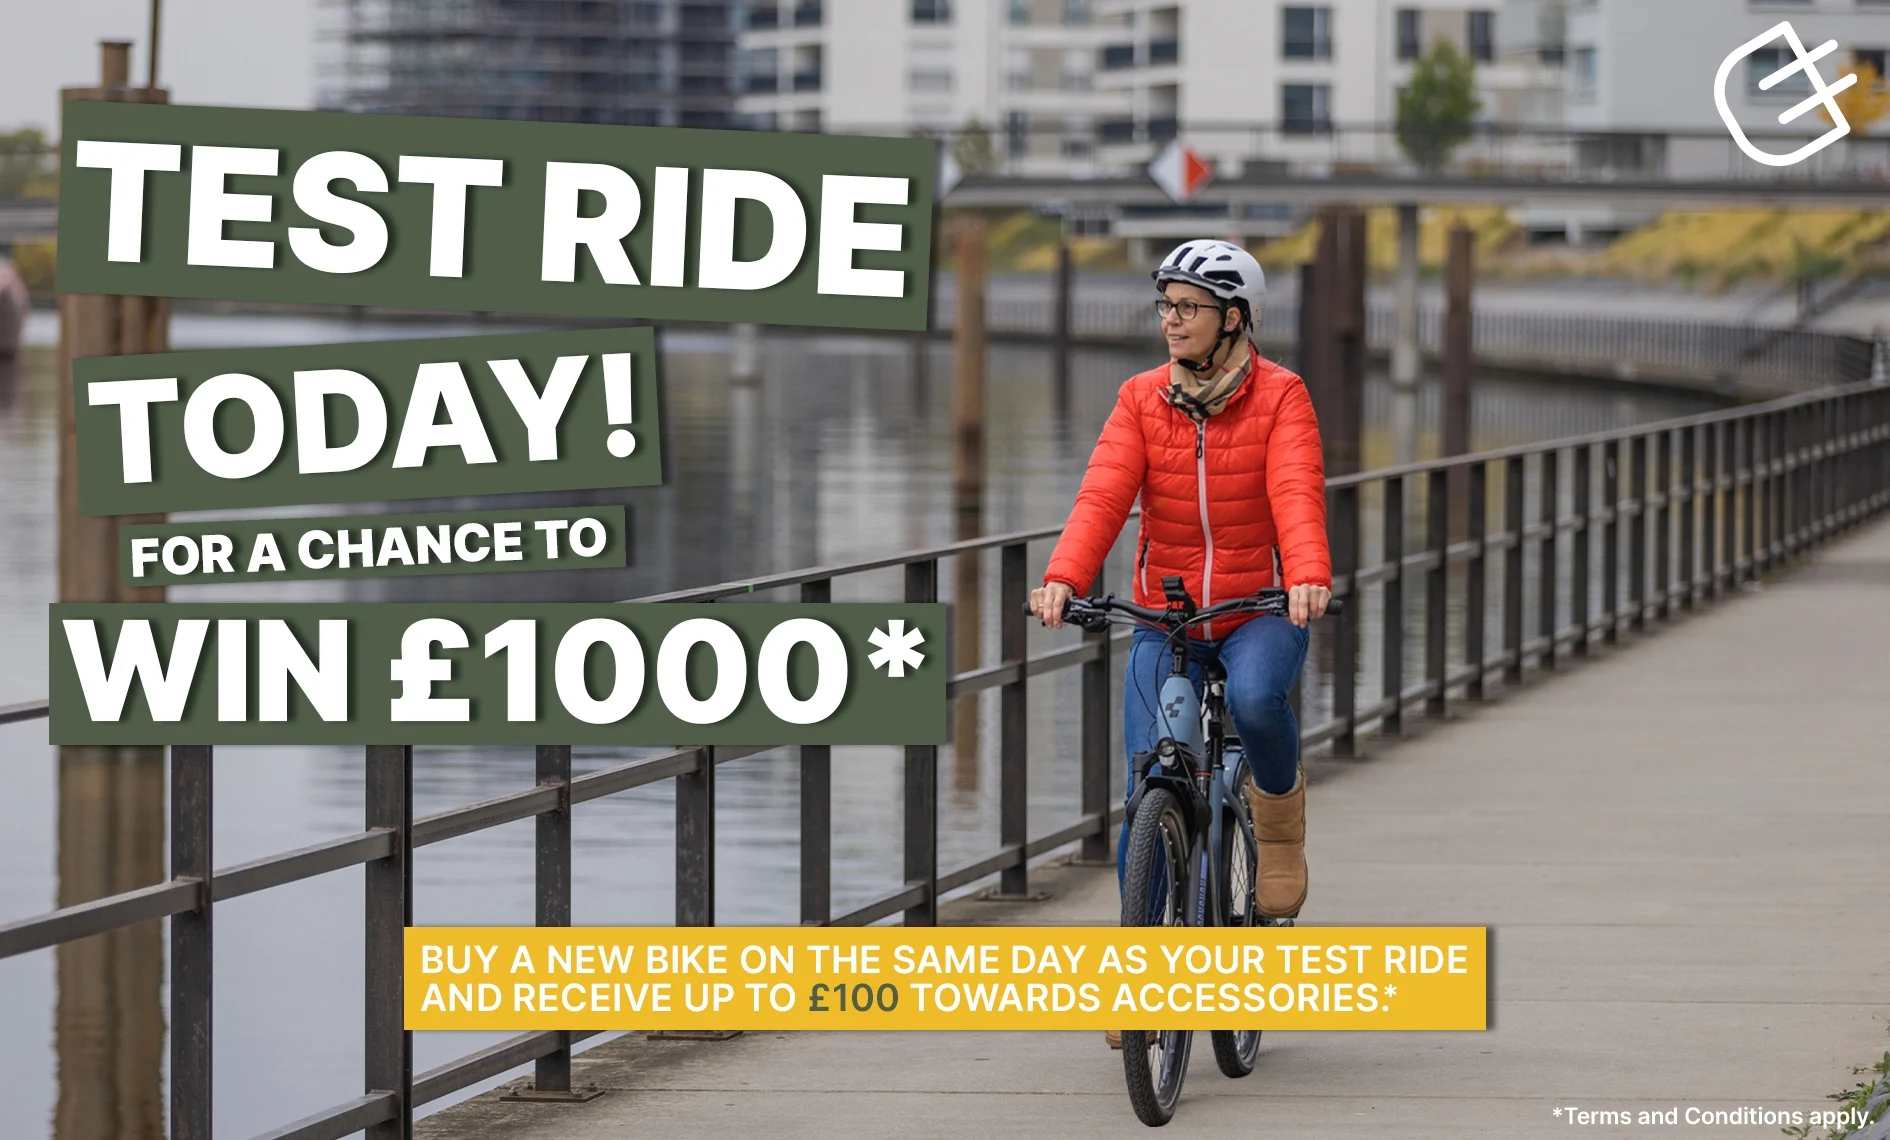 Take A Test Ride For A Chance To Win £1000 Cash Back